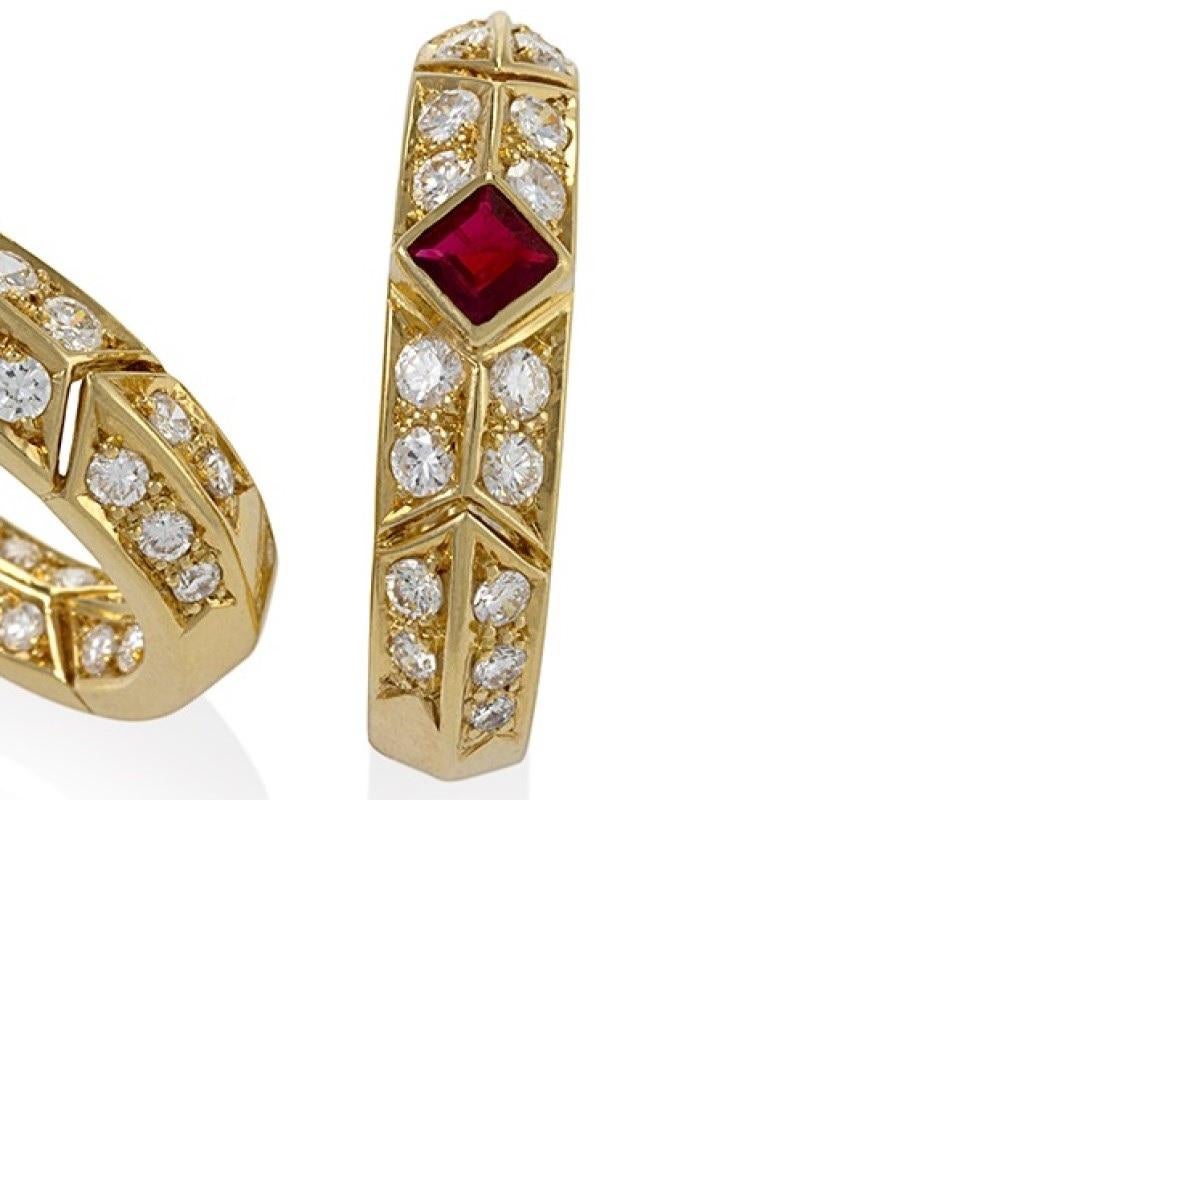 Gold, Ruby and Diamond Earrings by Van Cleef & Arpels im Zustand „Hervorragend“ in New York, NY